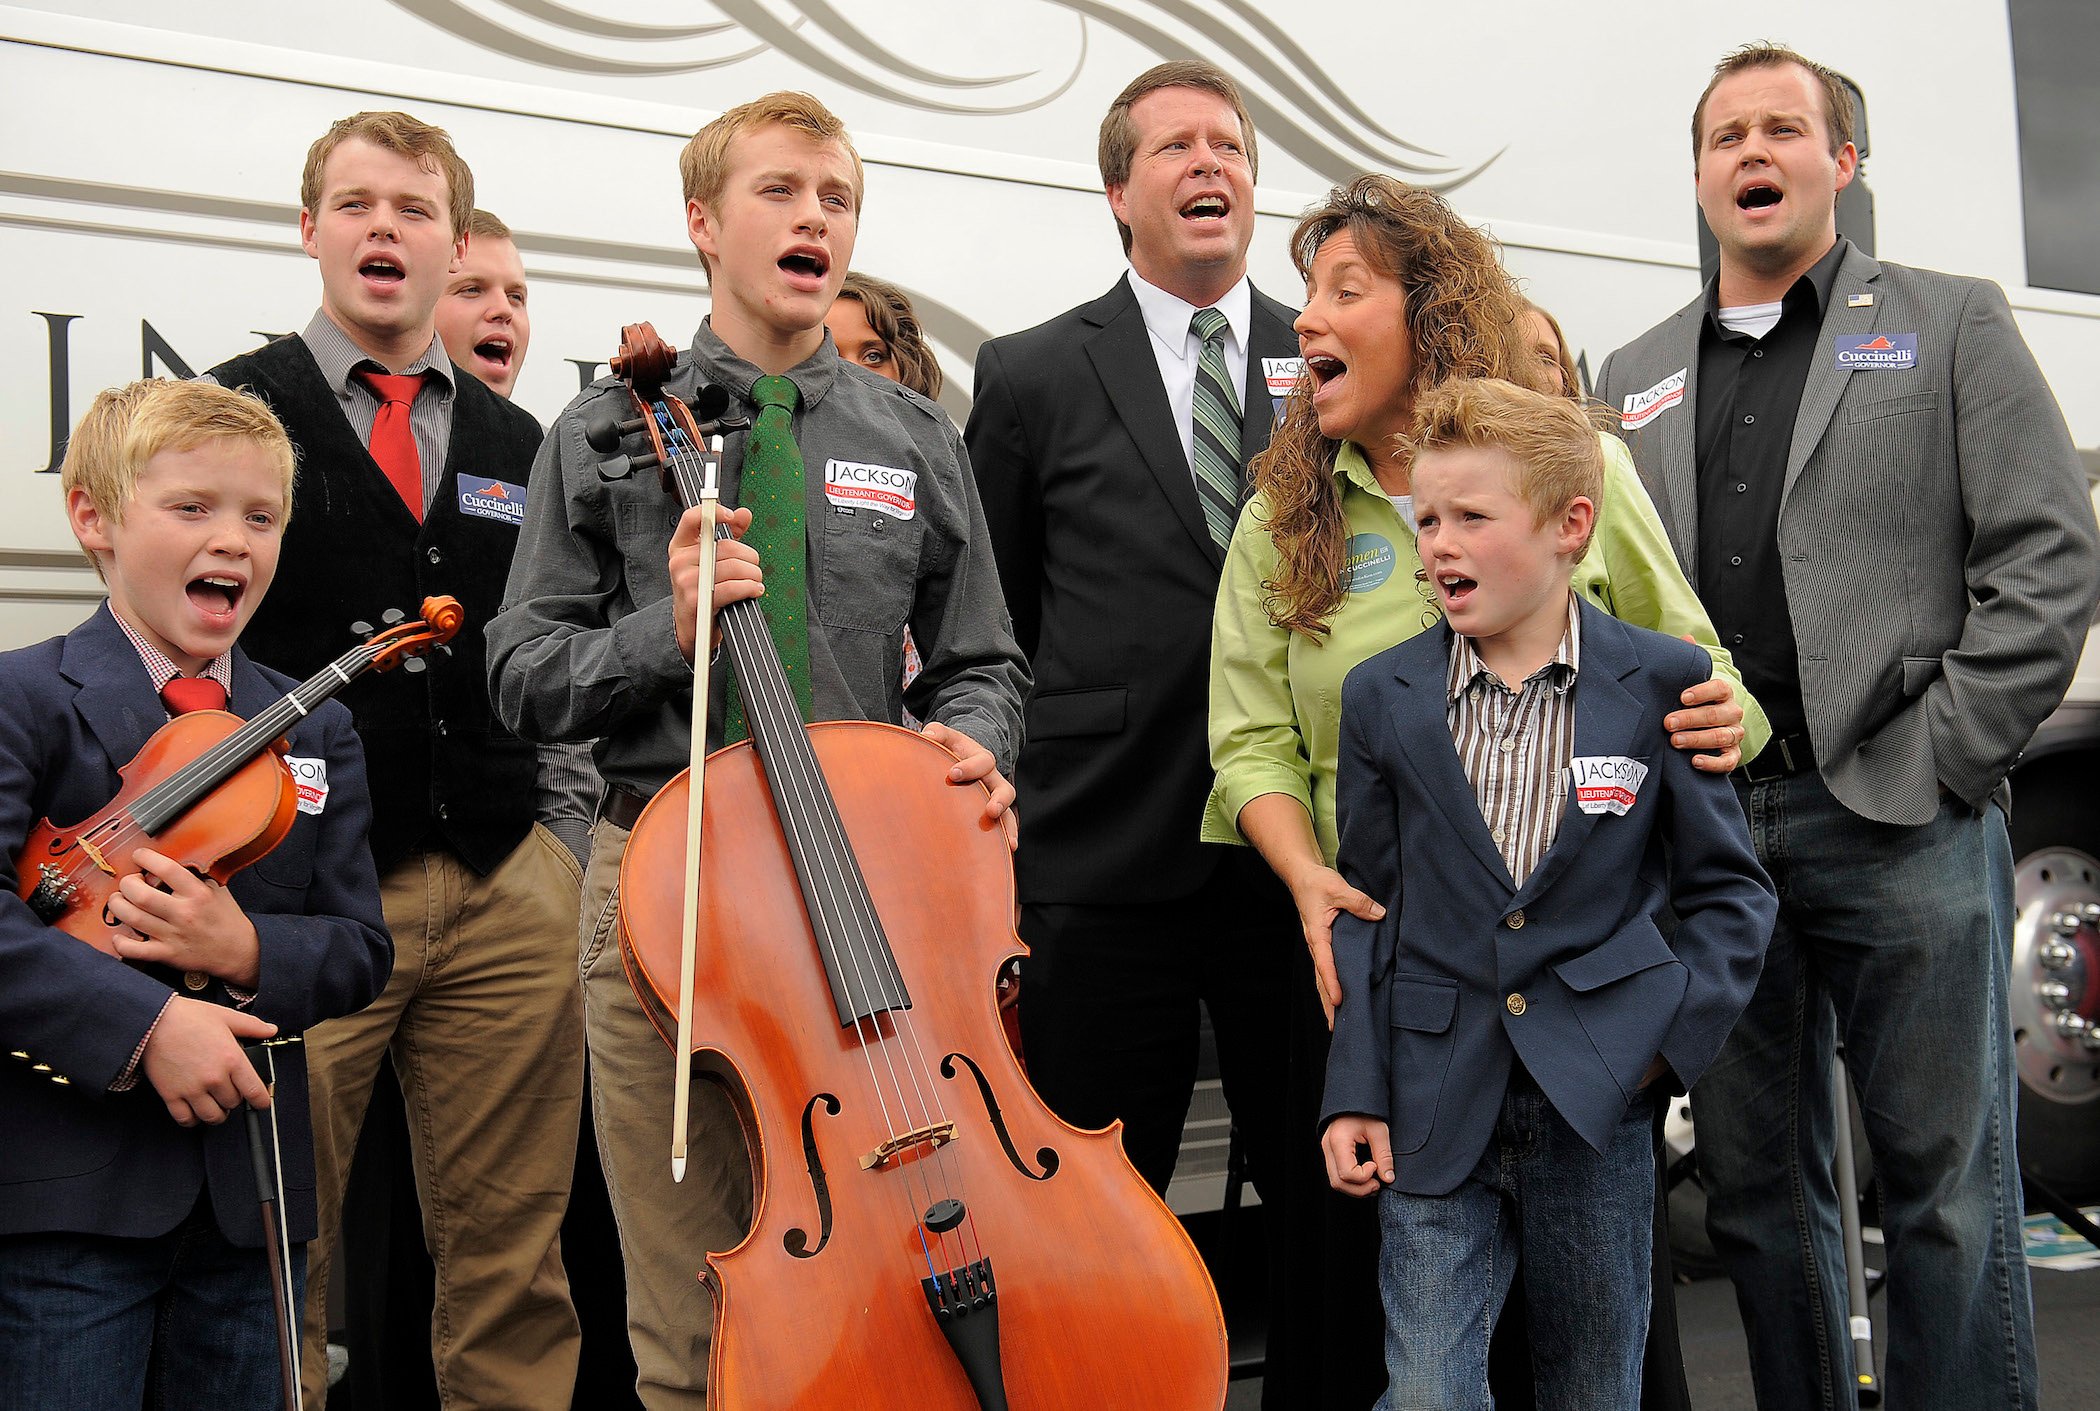 The Duggar family singing together